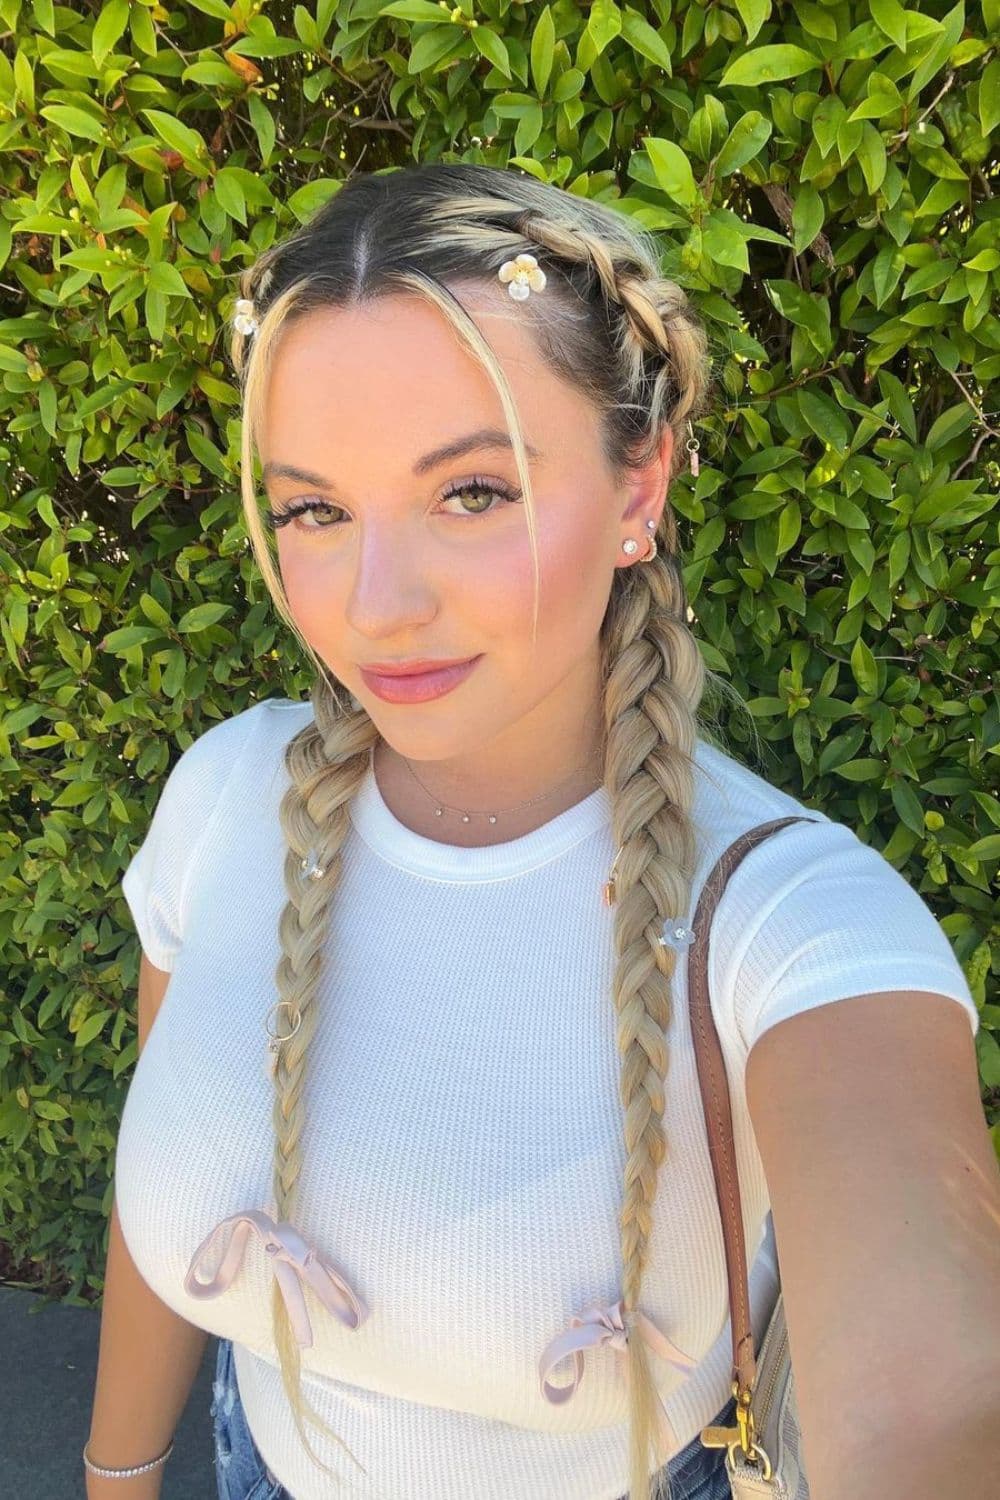 A woman with long blonde two French braids.